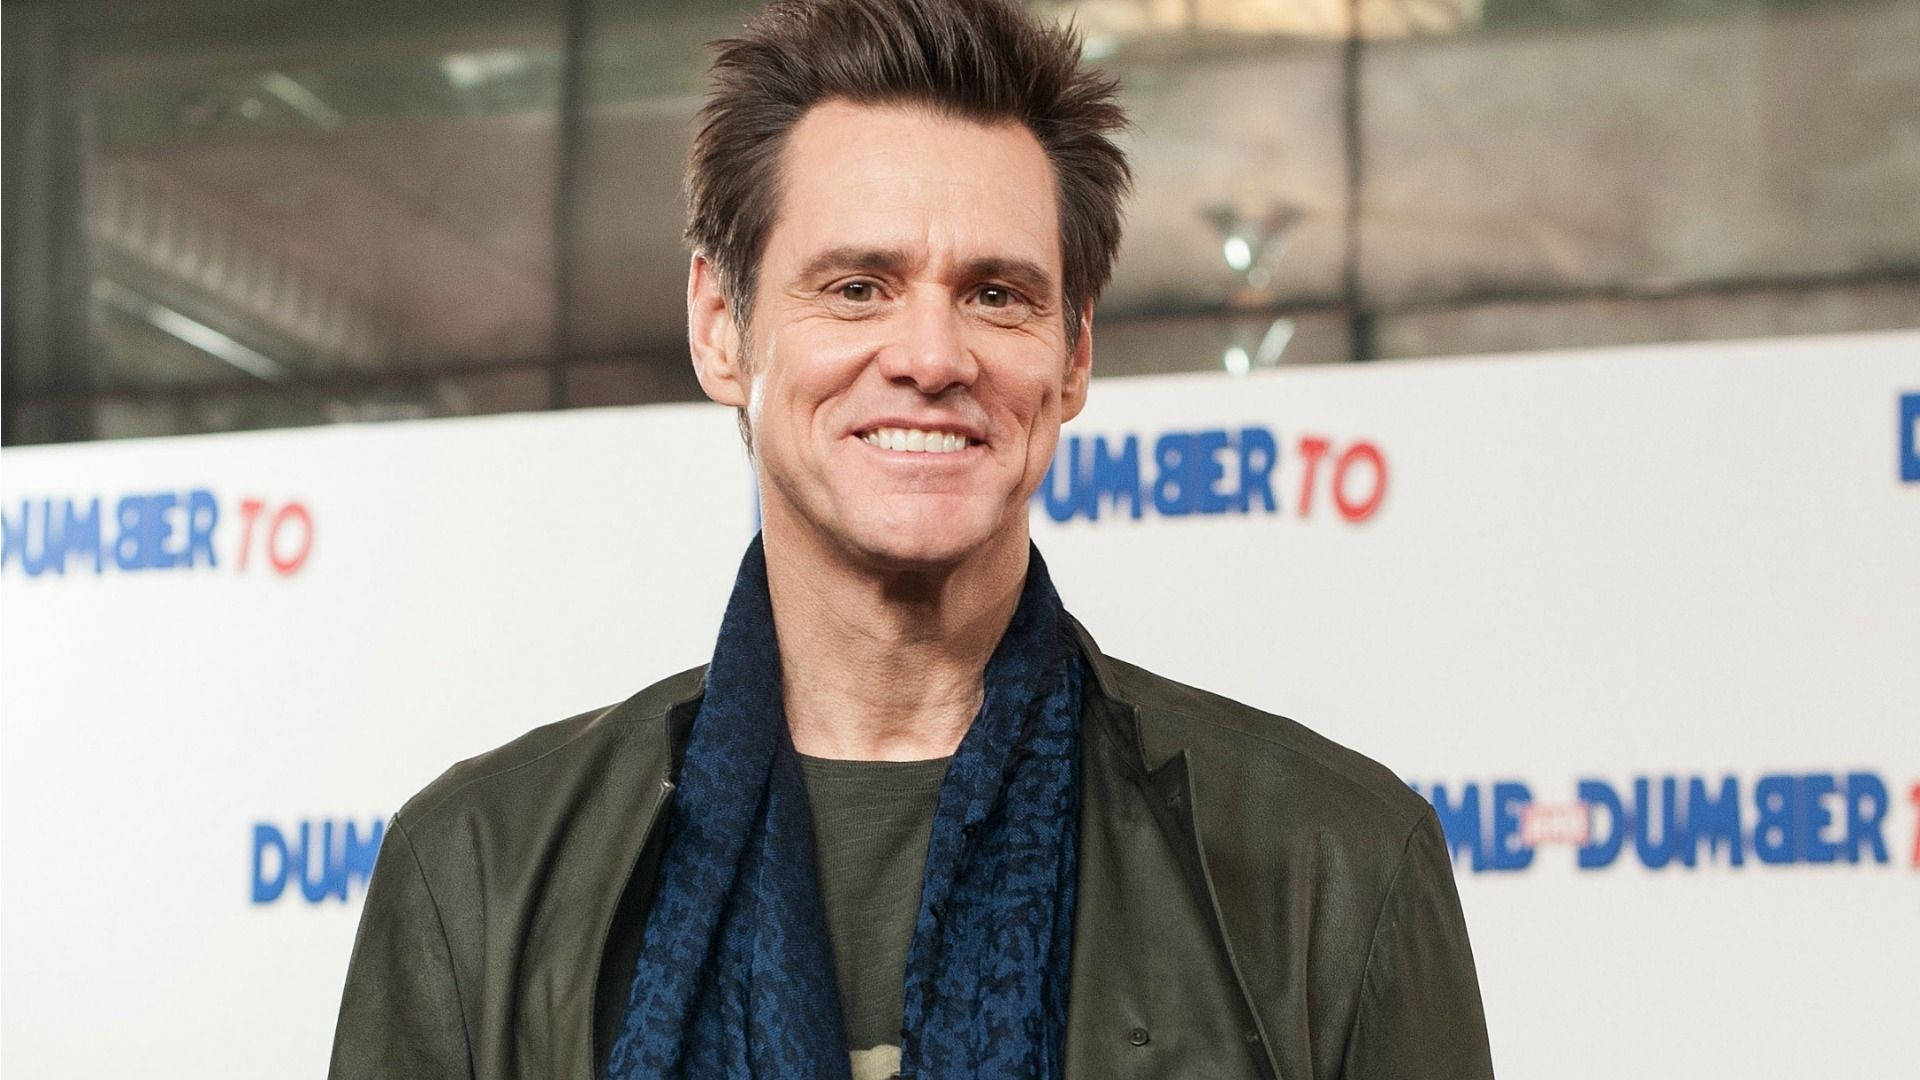 Admirable Smile Of Jim Carrey Background